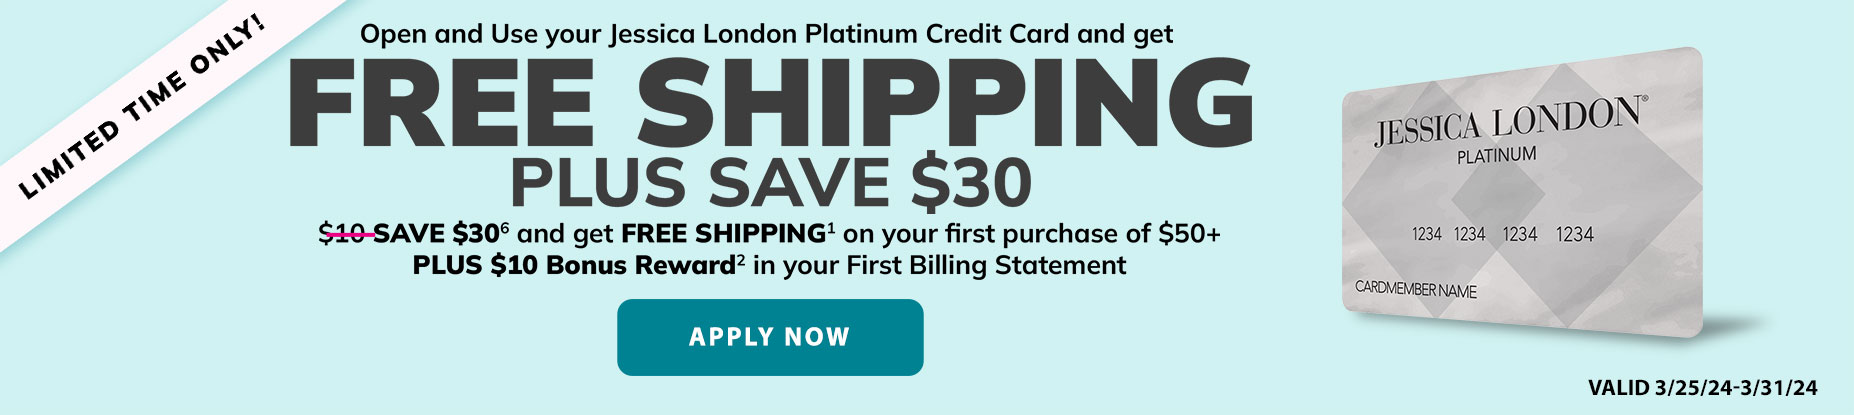 Limited time only! Free shipping plus save $30 with Jessica London Platinum credit card